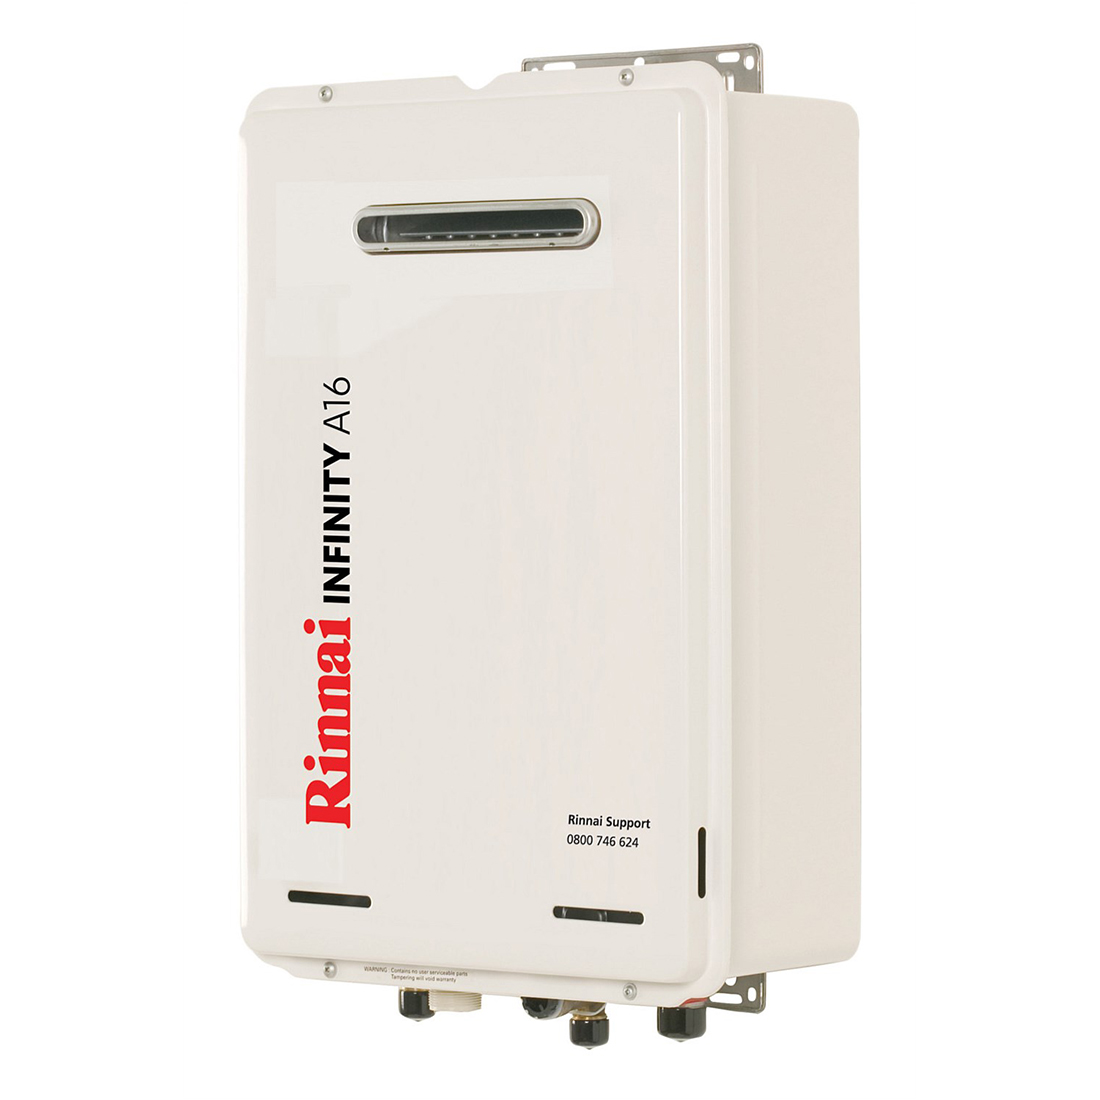 Gas instantaneous water heater